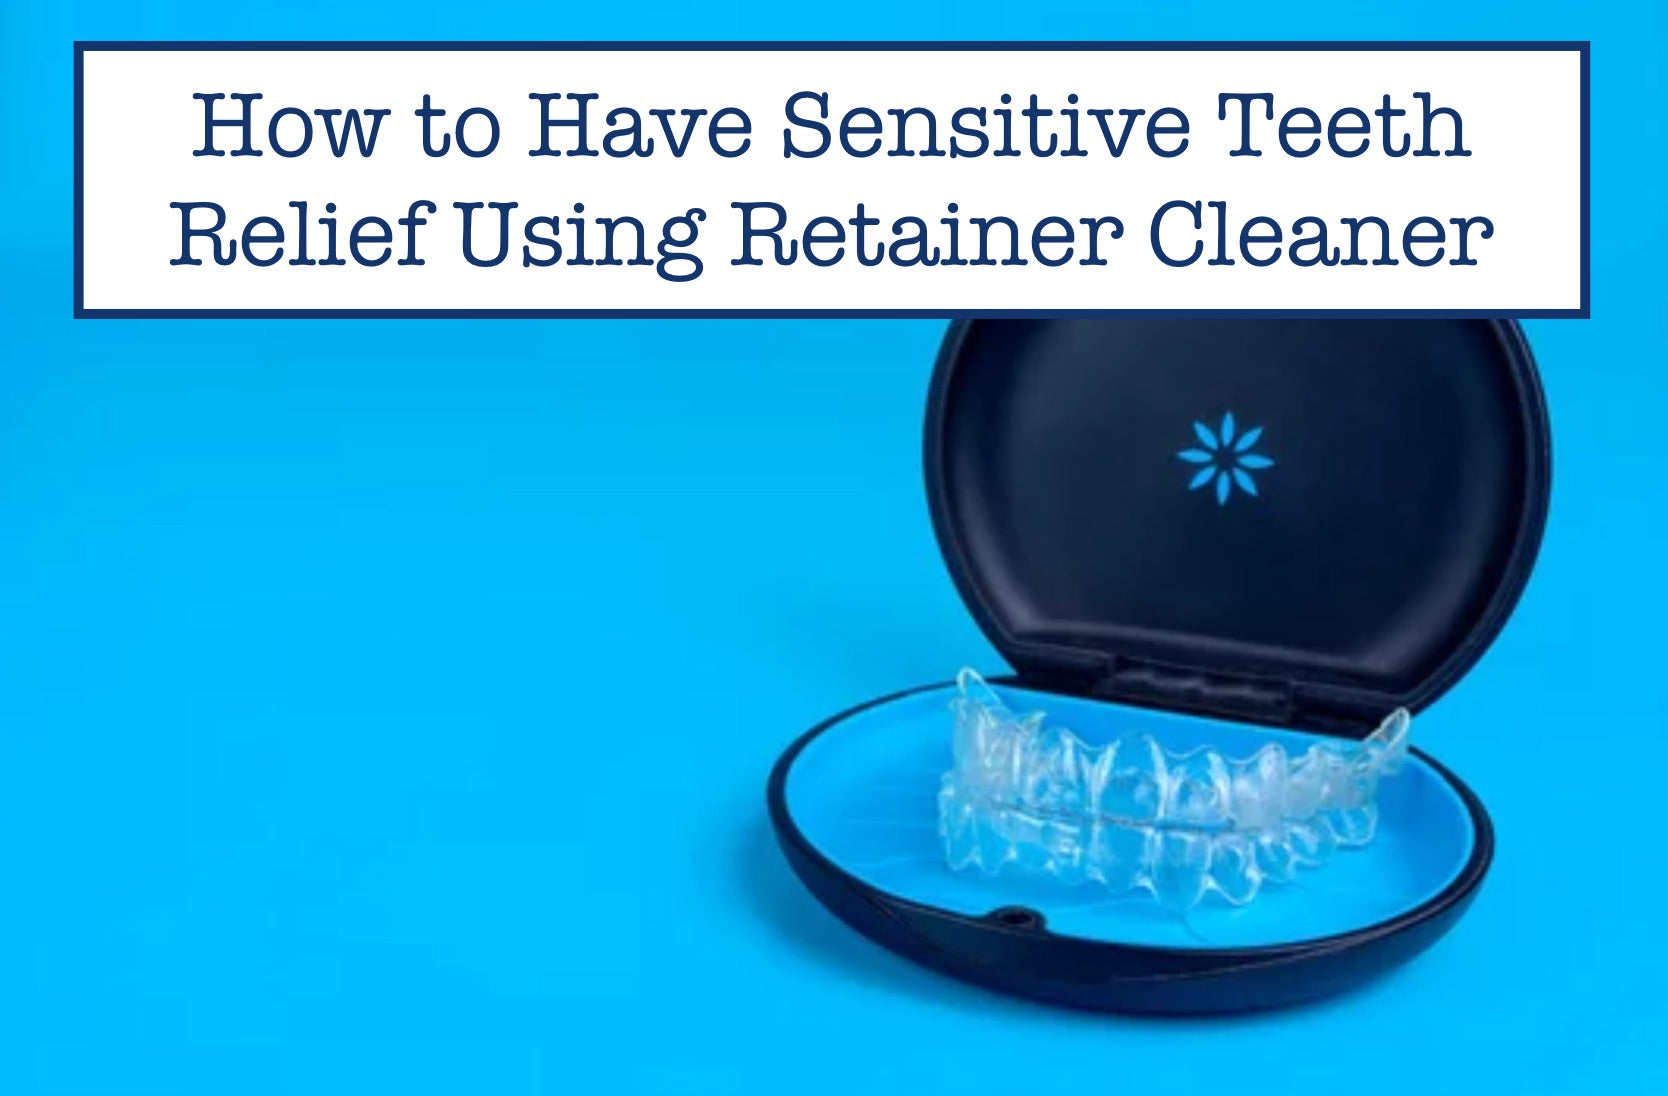 How to Have Sensitive Teeth Relief Using Retainer Cleaner